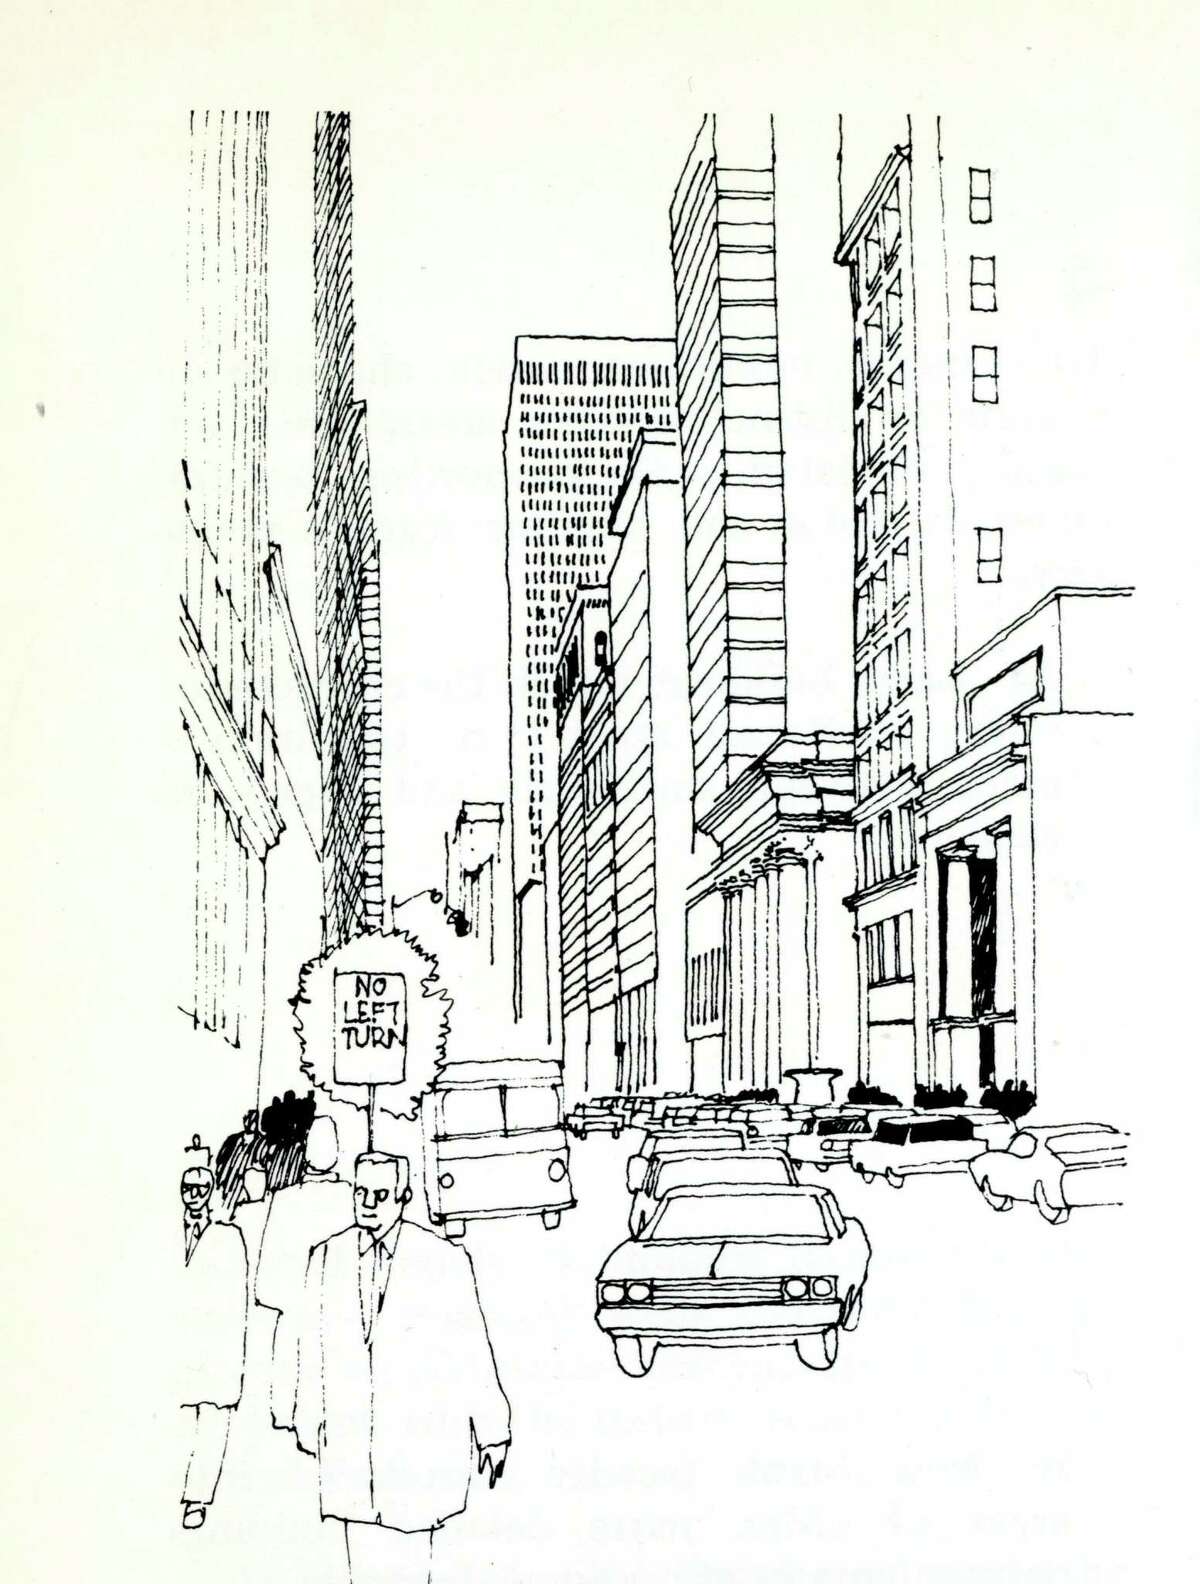 An illustration from the 1971 San Francisco Department of City Planning book “The Urban Design Plan for the Comprehensive Plan of San Francisco.”